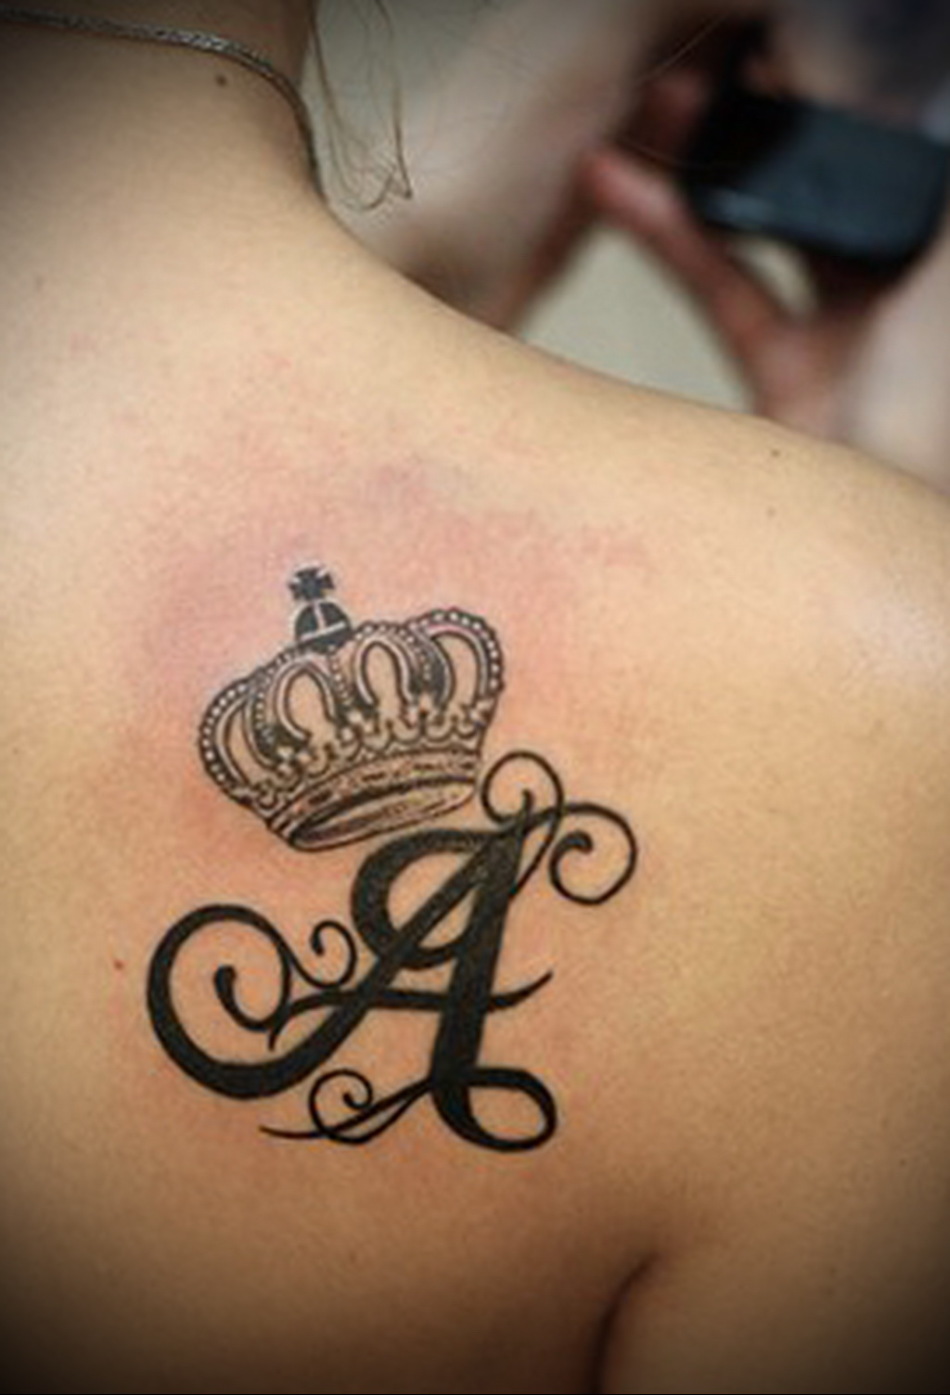 Crown Tatus with the first letter of the name on the girl's shoulder blade